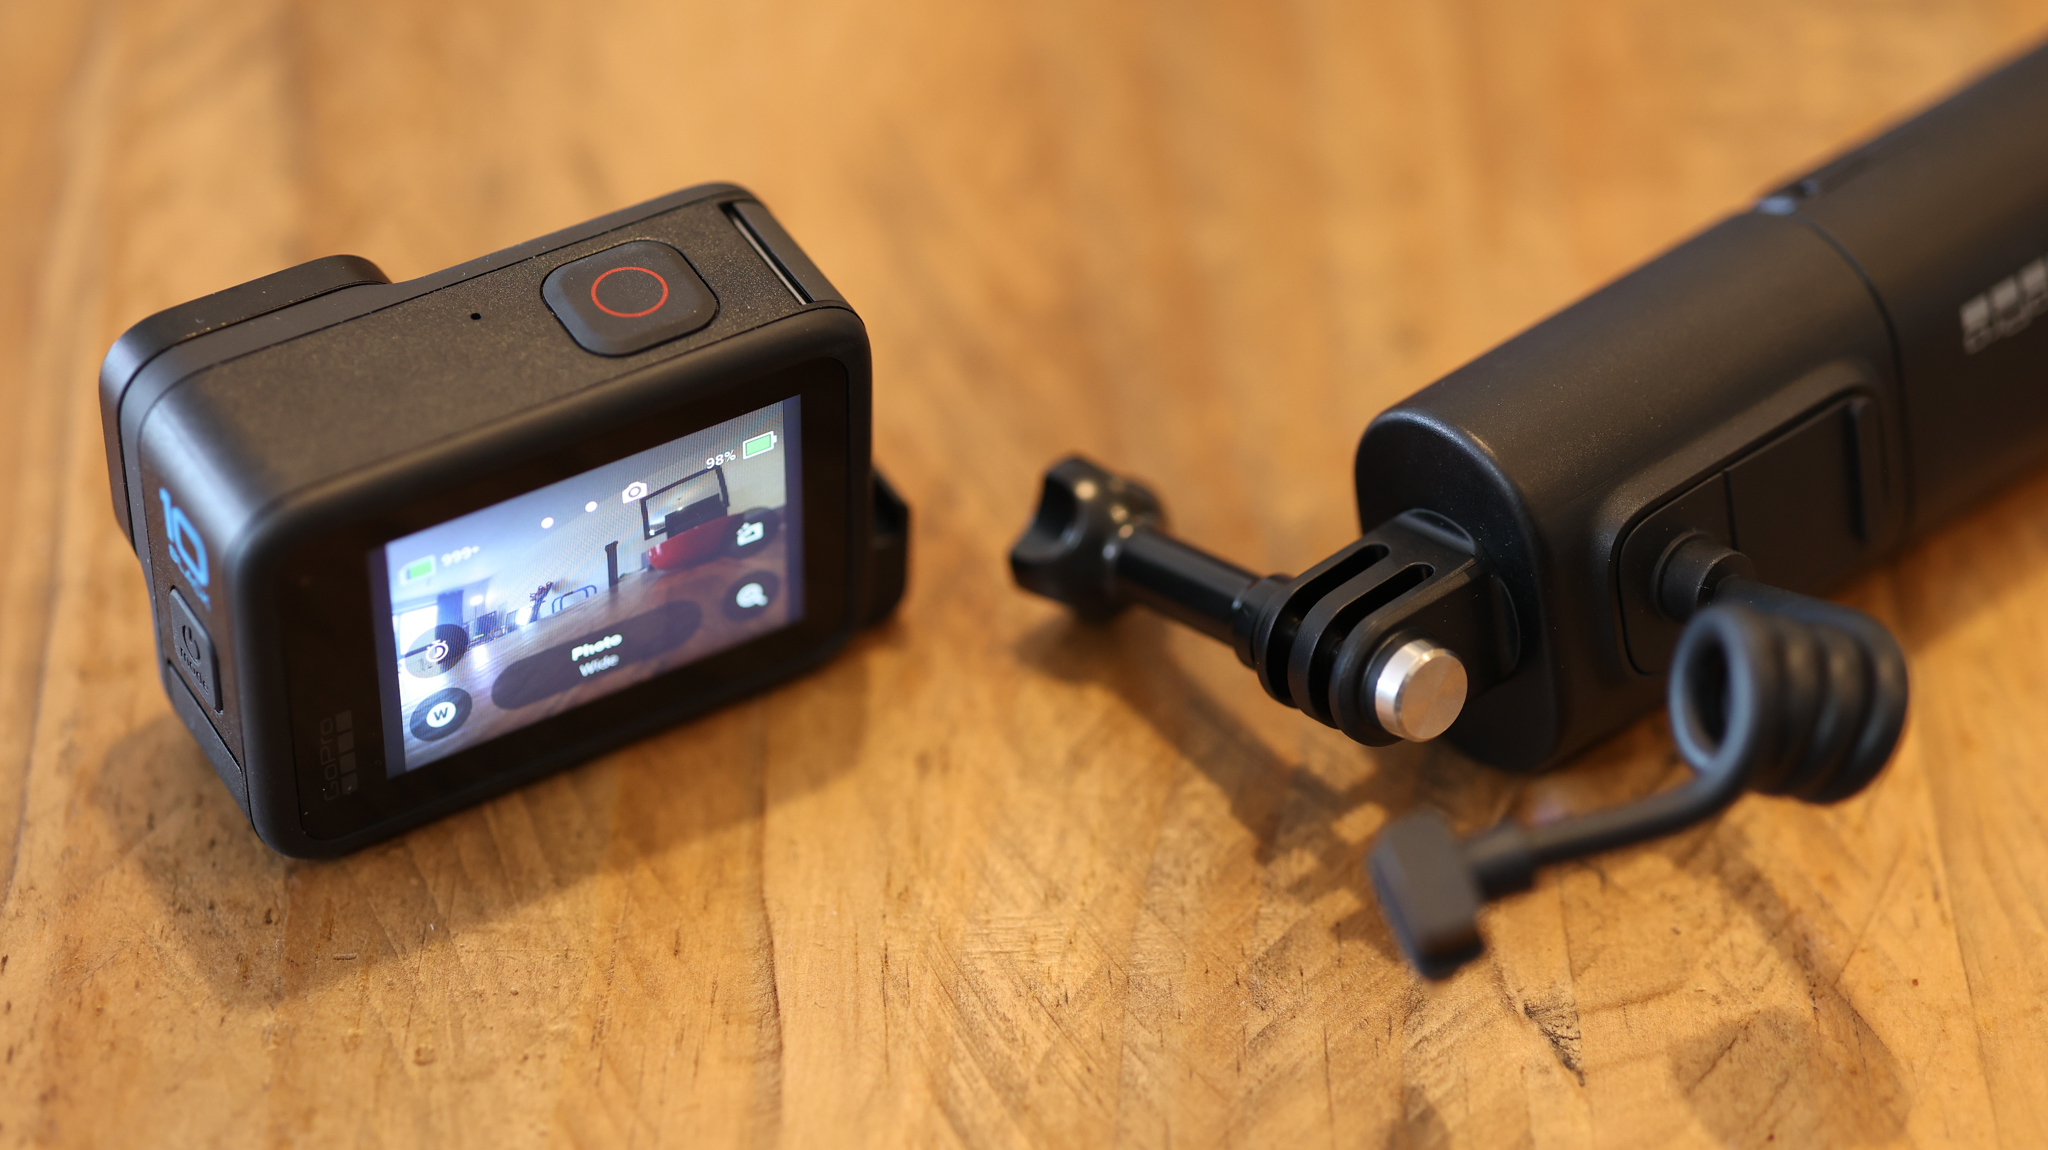 The GoPro Volta tripod grip on a wooden table